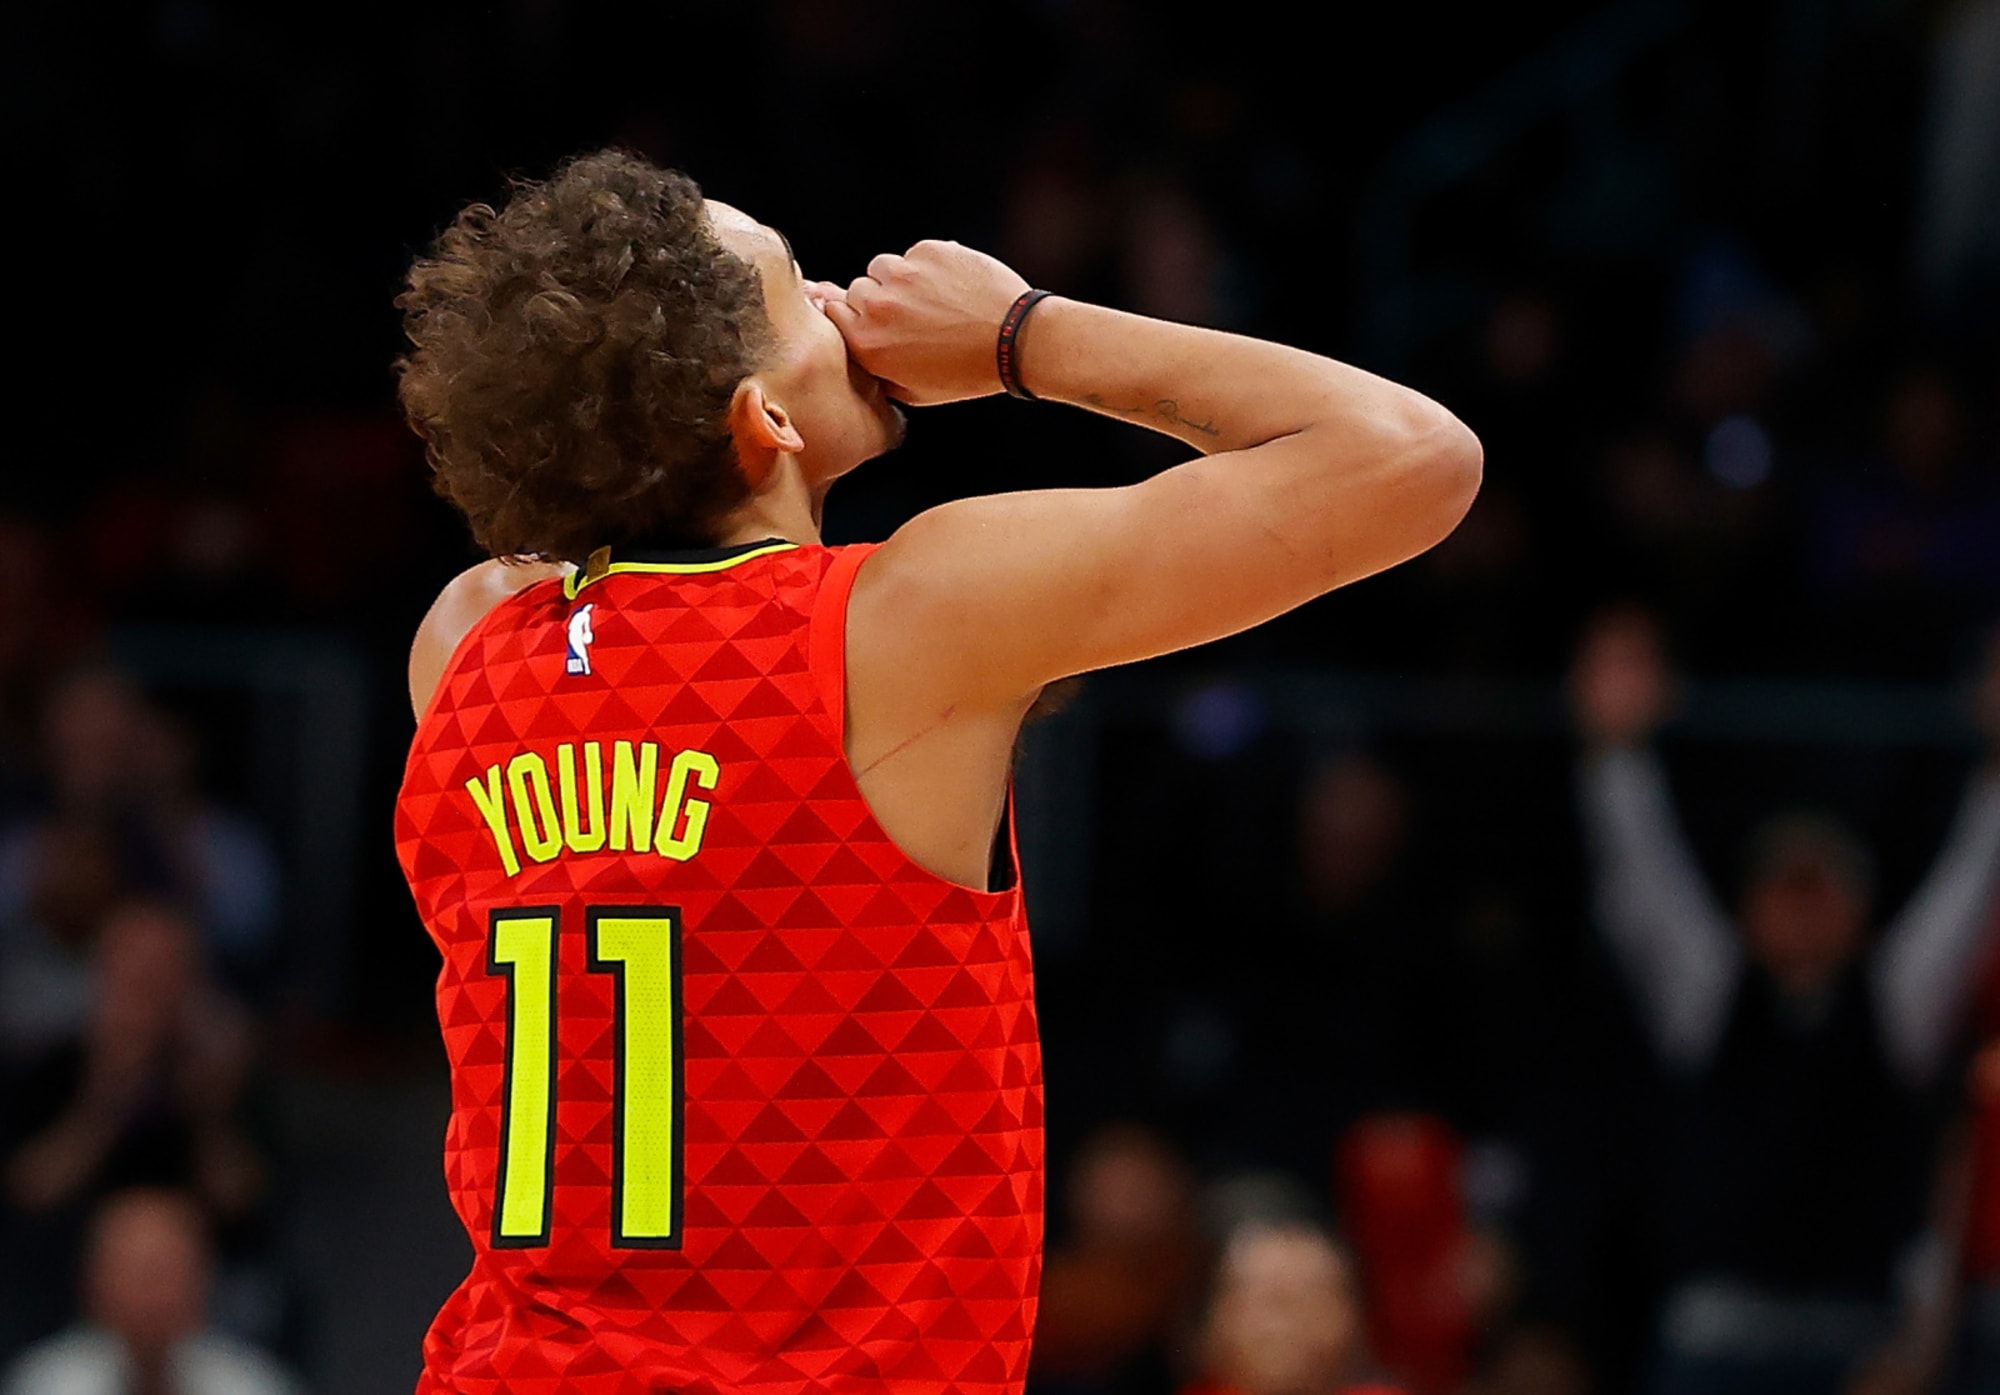 trae young all star jersey